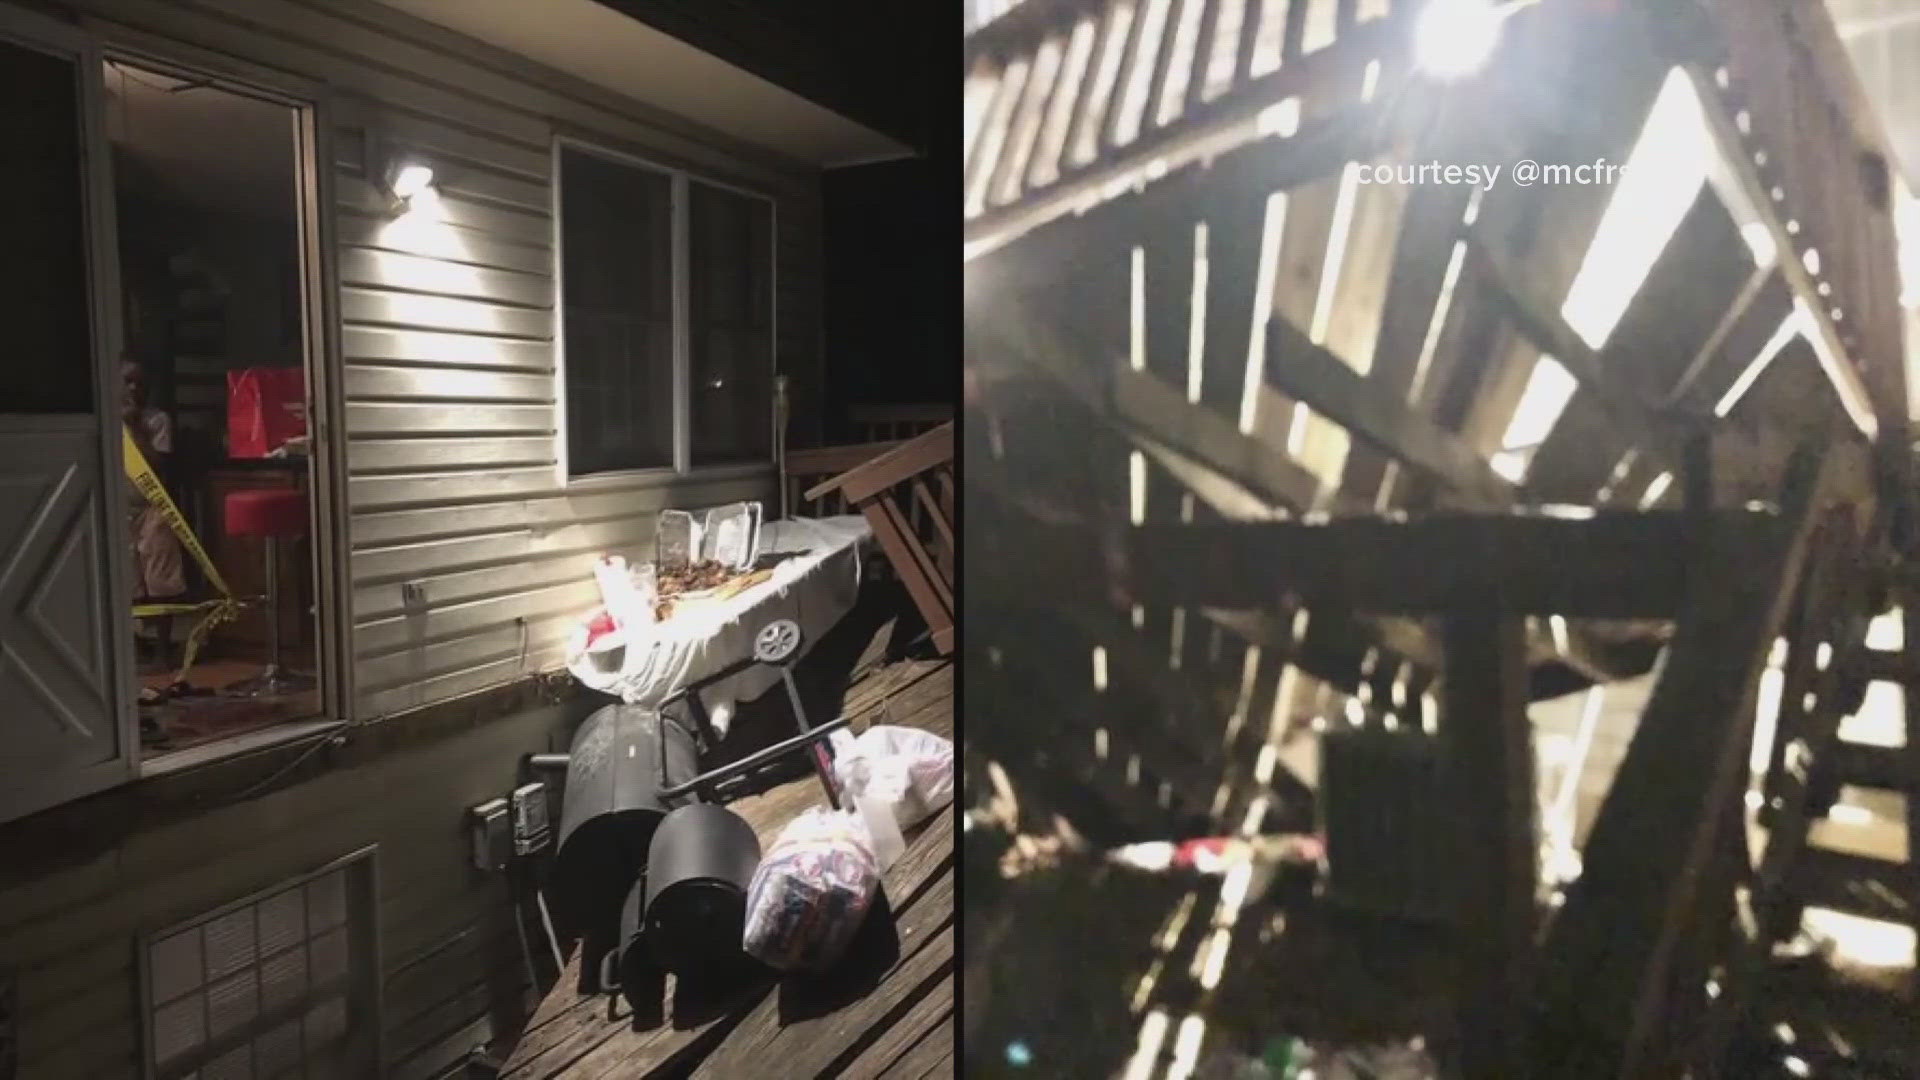 A month-long free deck inspection program in Montgomery County revealed a majority of the 140 structures checked by inspectors had code or safety concerns.